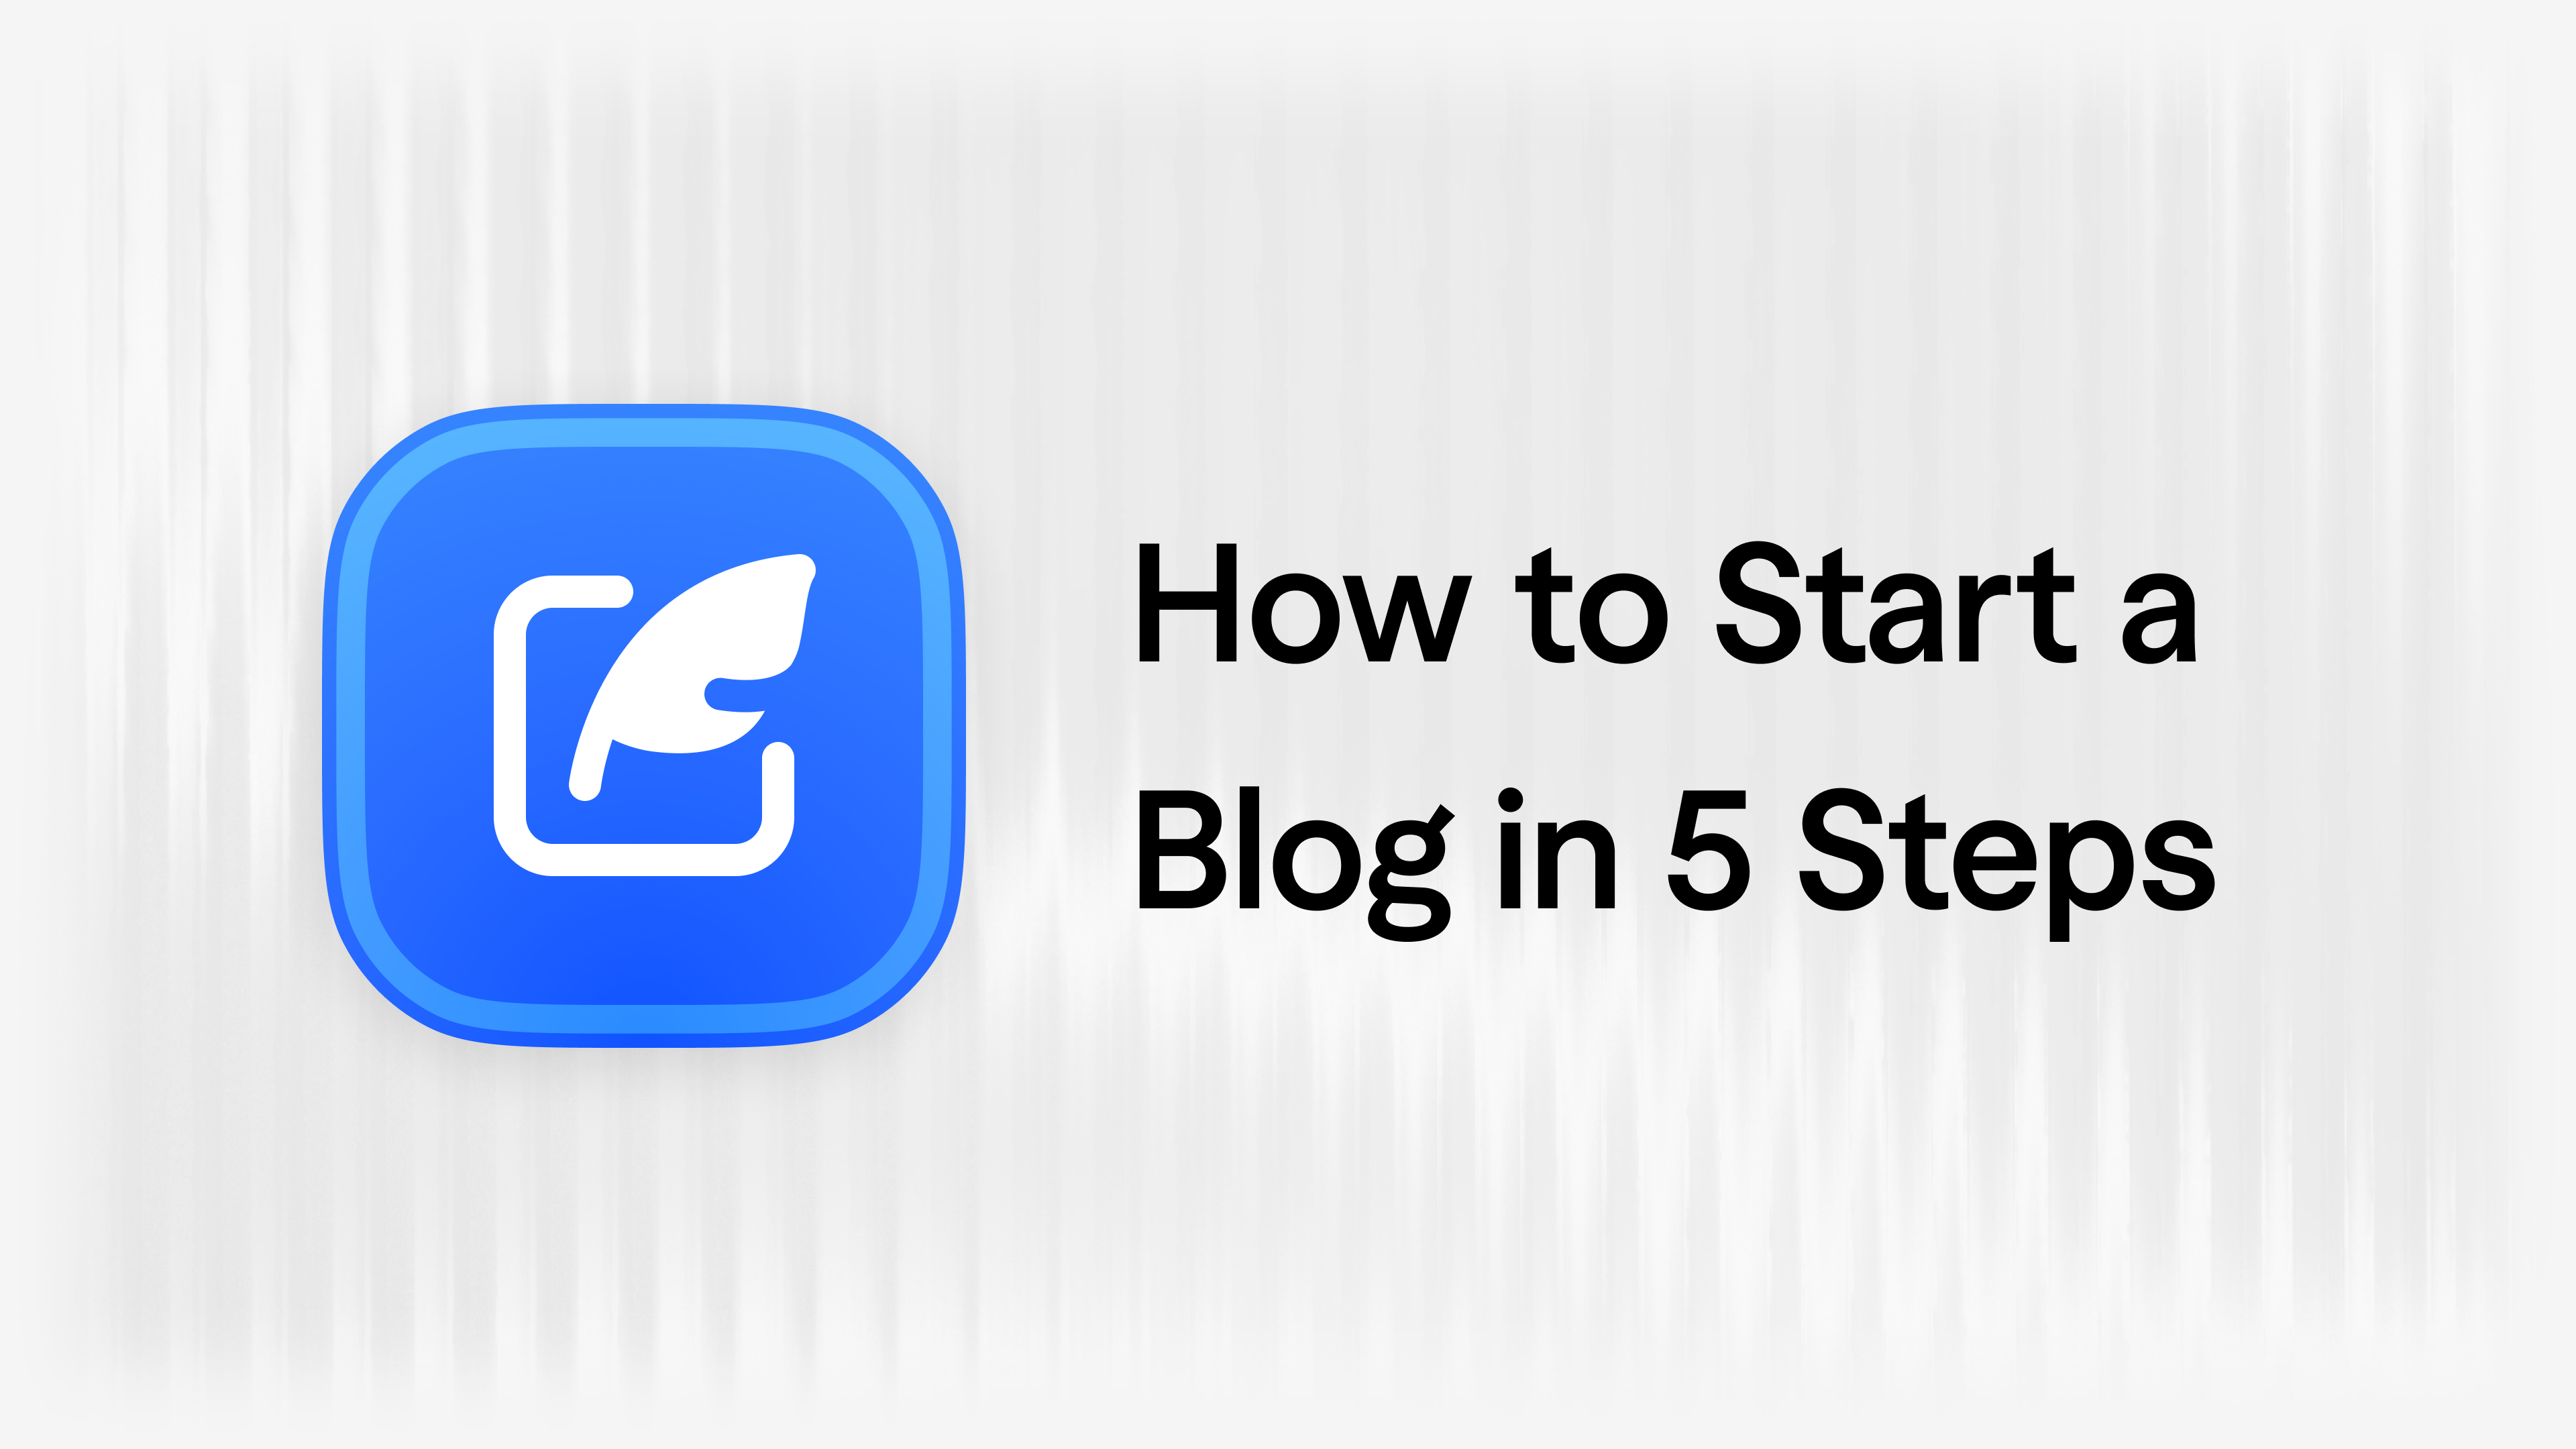 How to Start a Blog for Your Startup in 5 Steps article visual